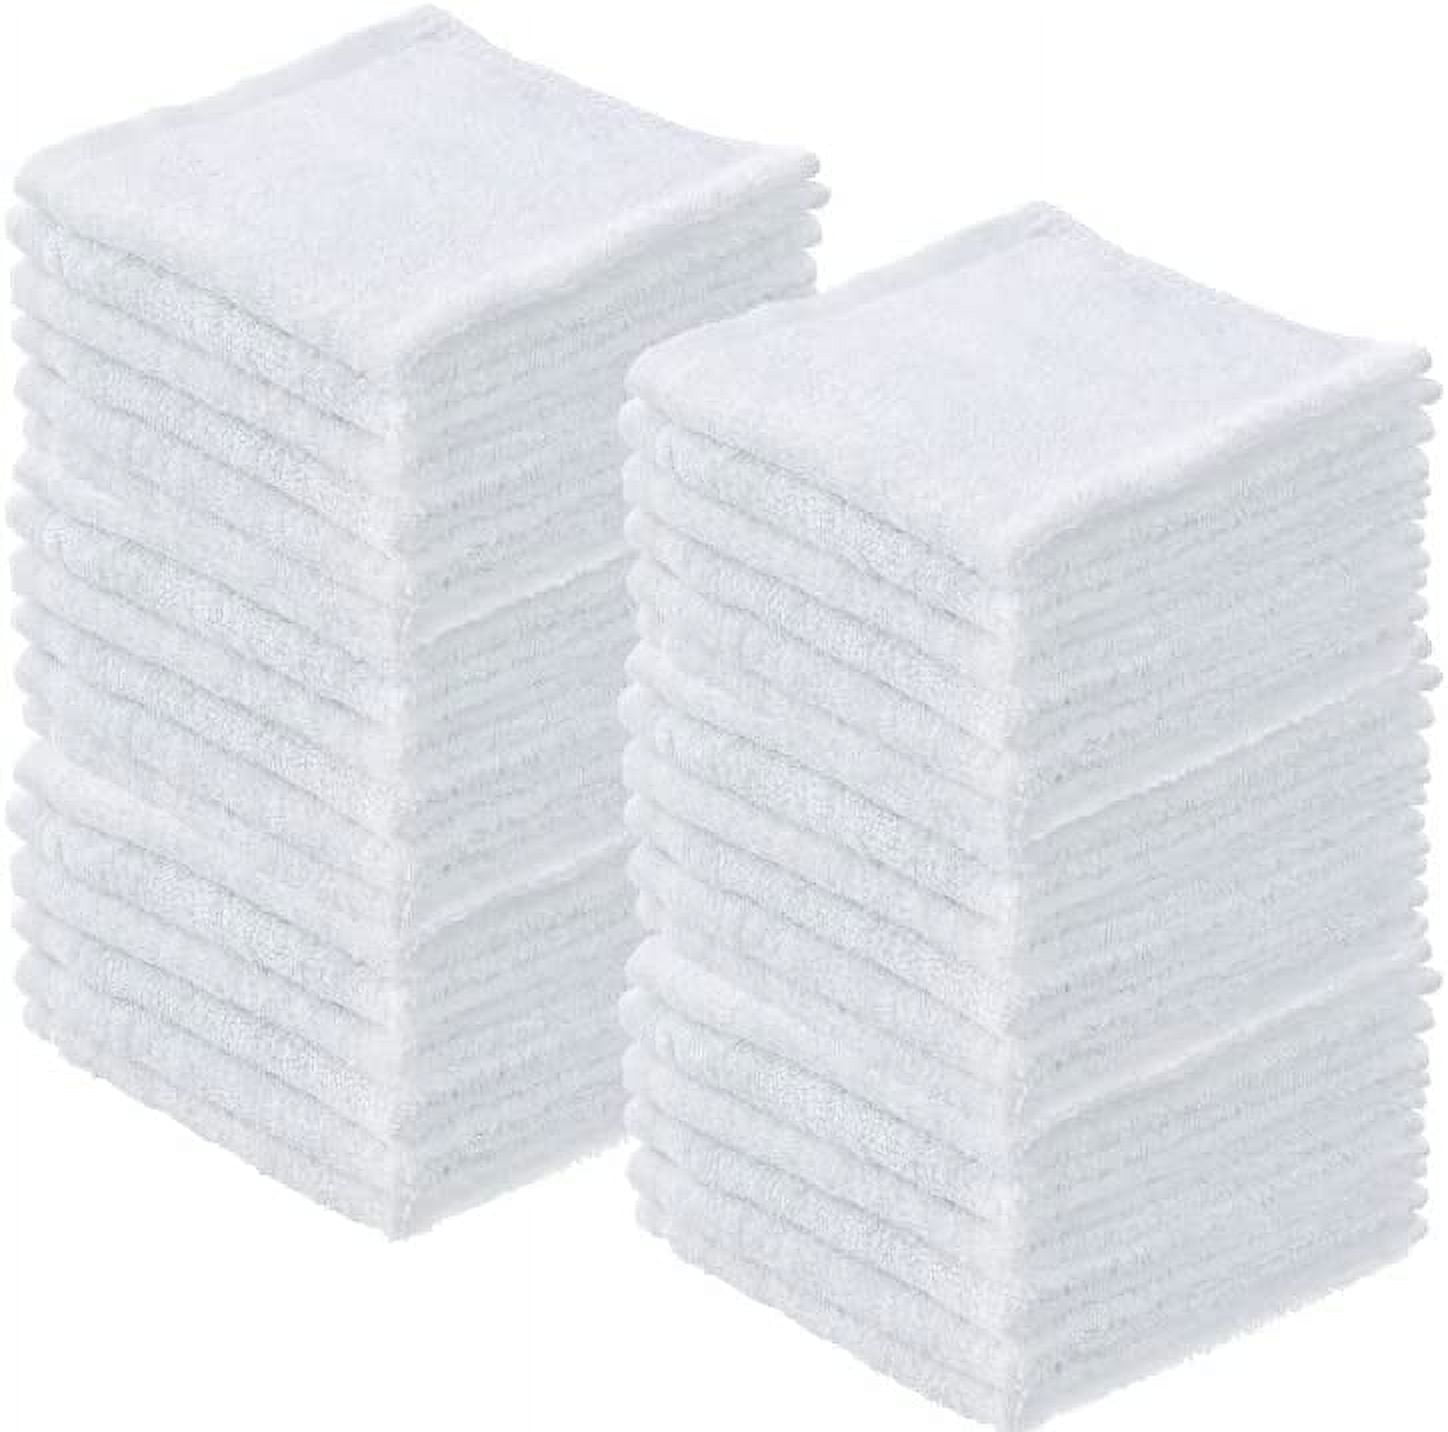 Talvania Washcloths Towels 24 Pack Super Absorbent Terry Towel 100% Ring Spun Cotton White Wash Cloth with Border Design Ideal for Face Wash